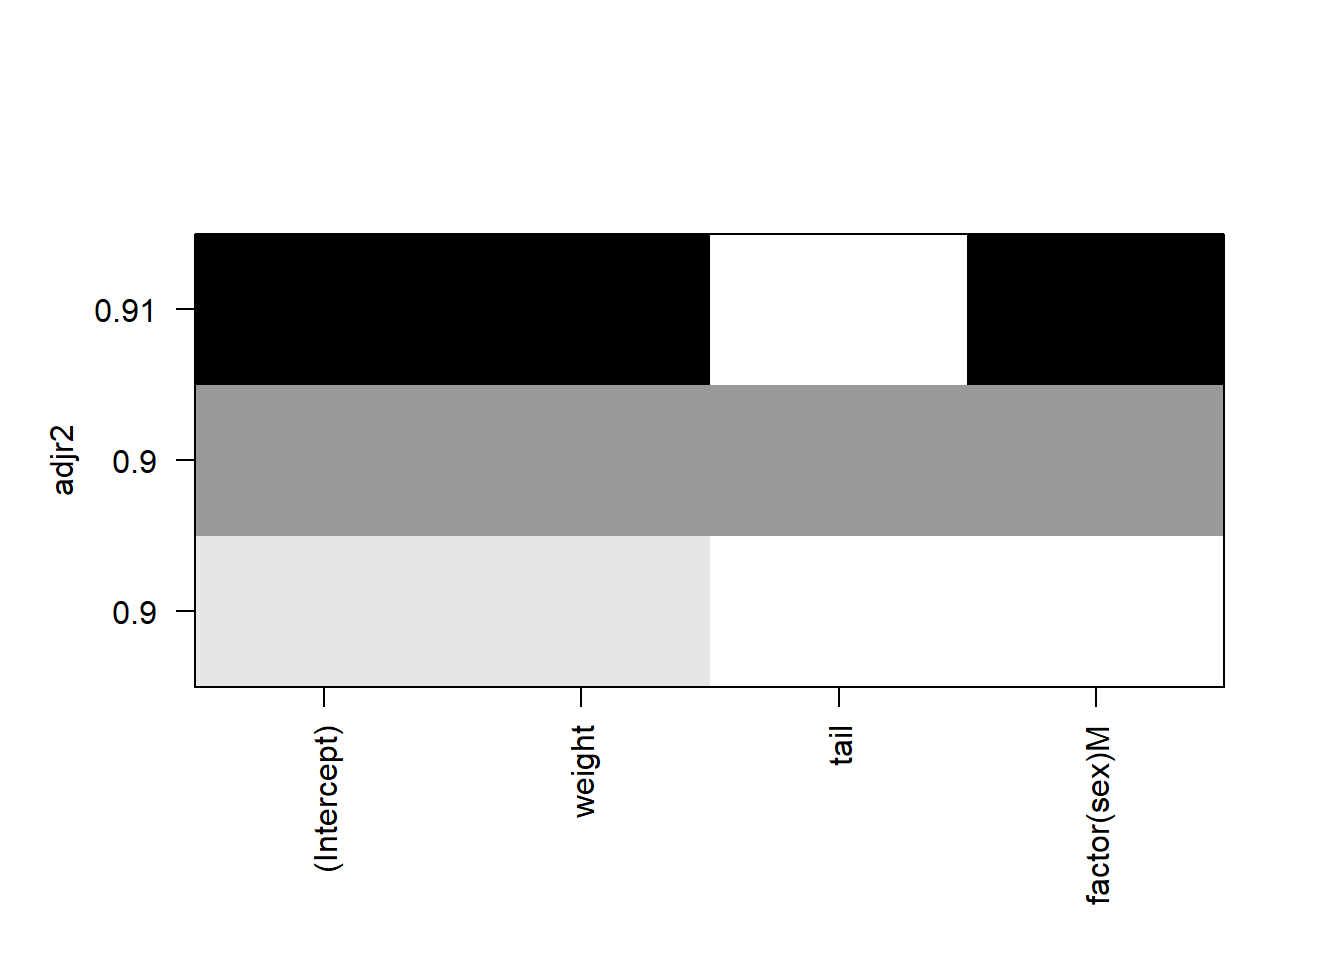 Plot showing adjusted R-squared values from the leaps package.